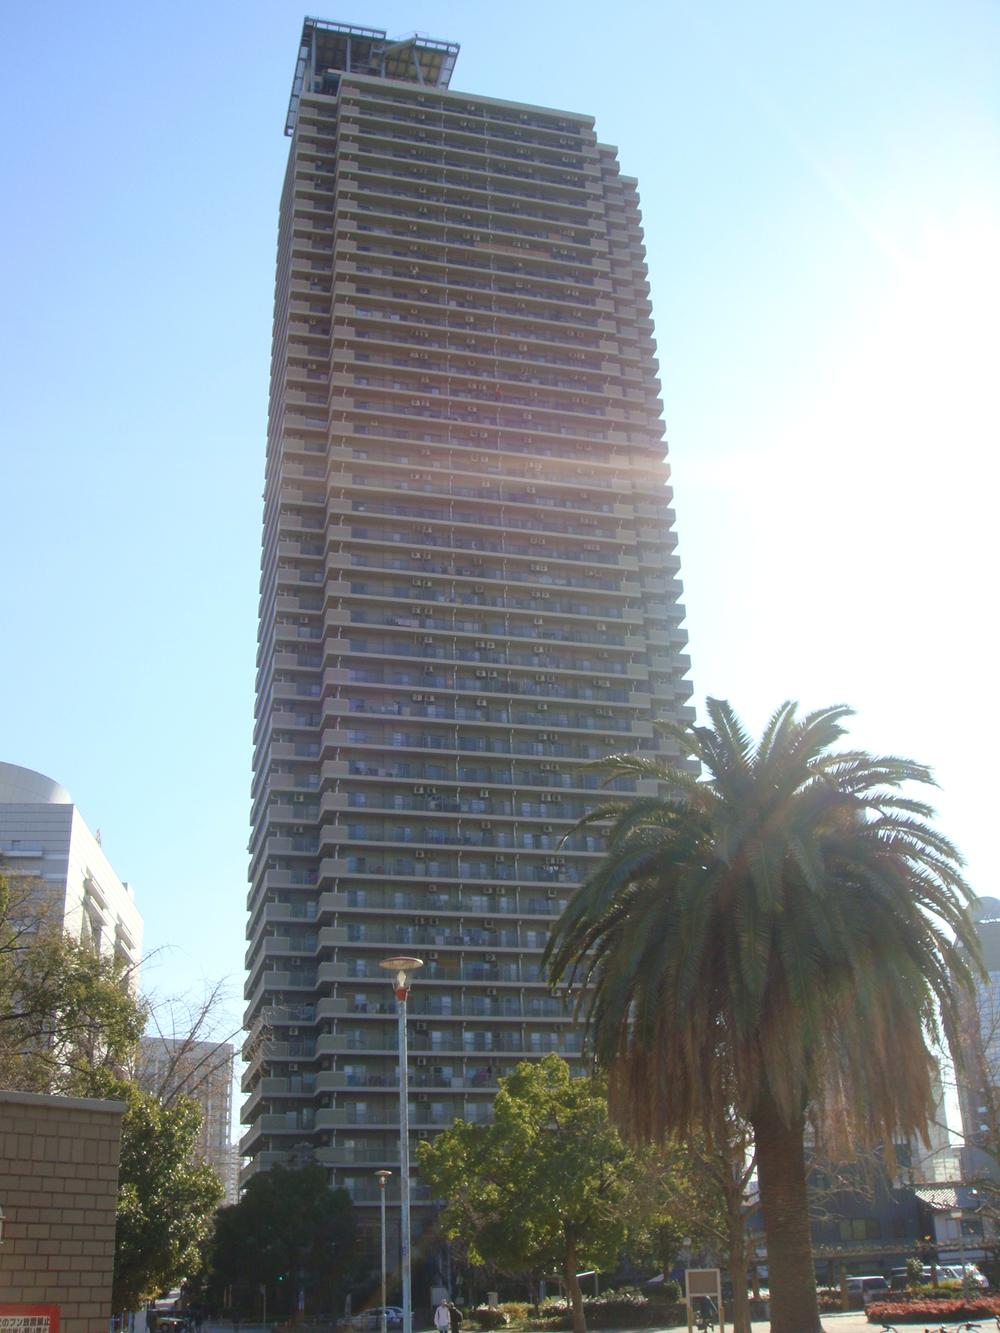 Local appearance photo. Tower apartment 18 floor of a location to Riverside 2013 December 23, shooting